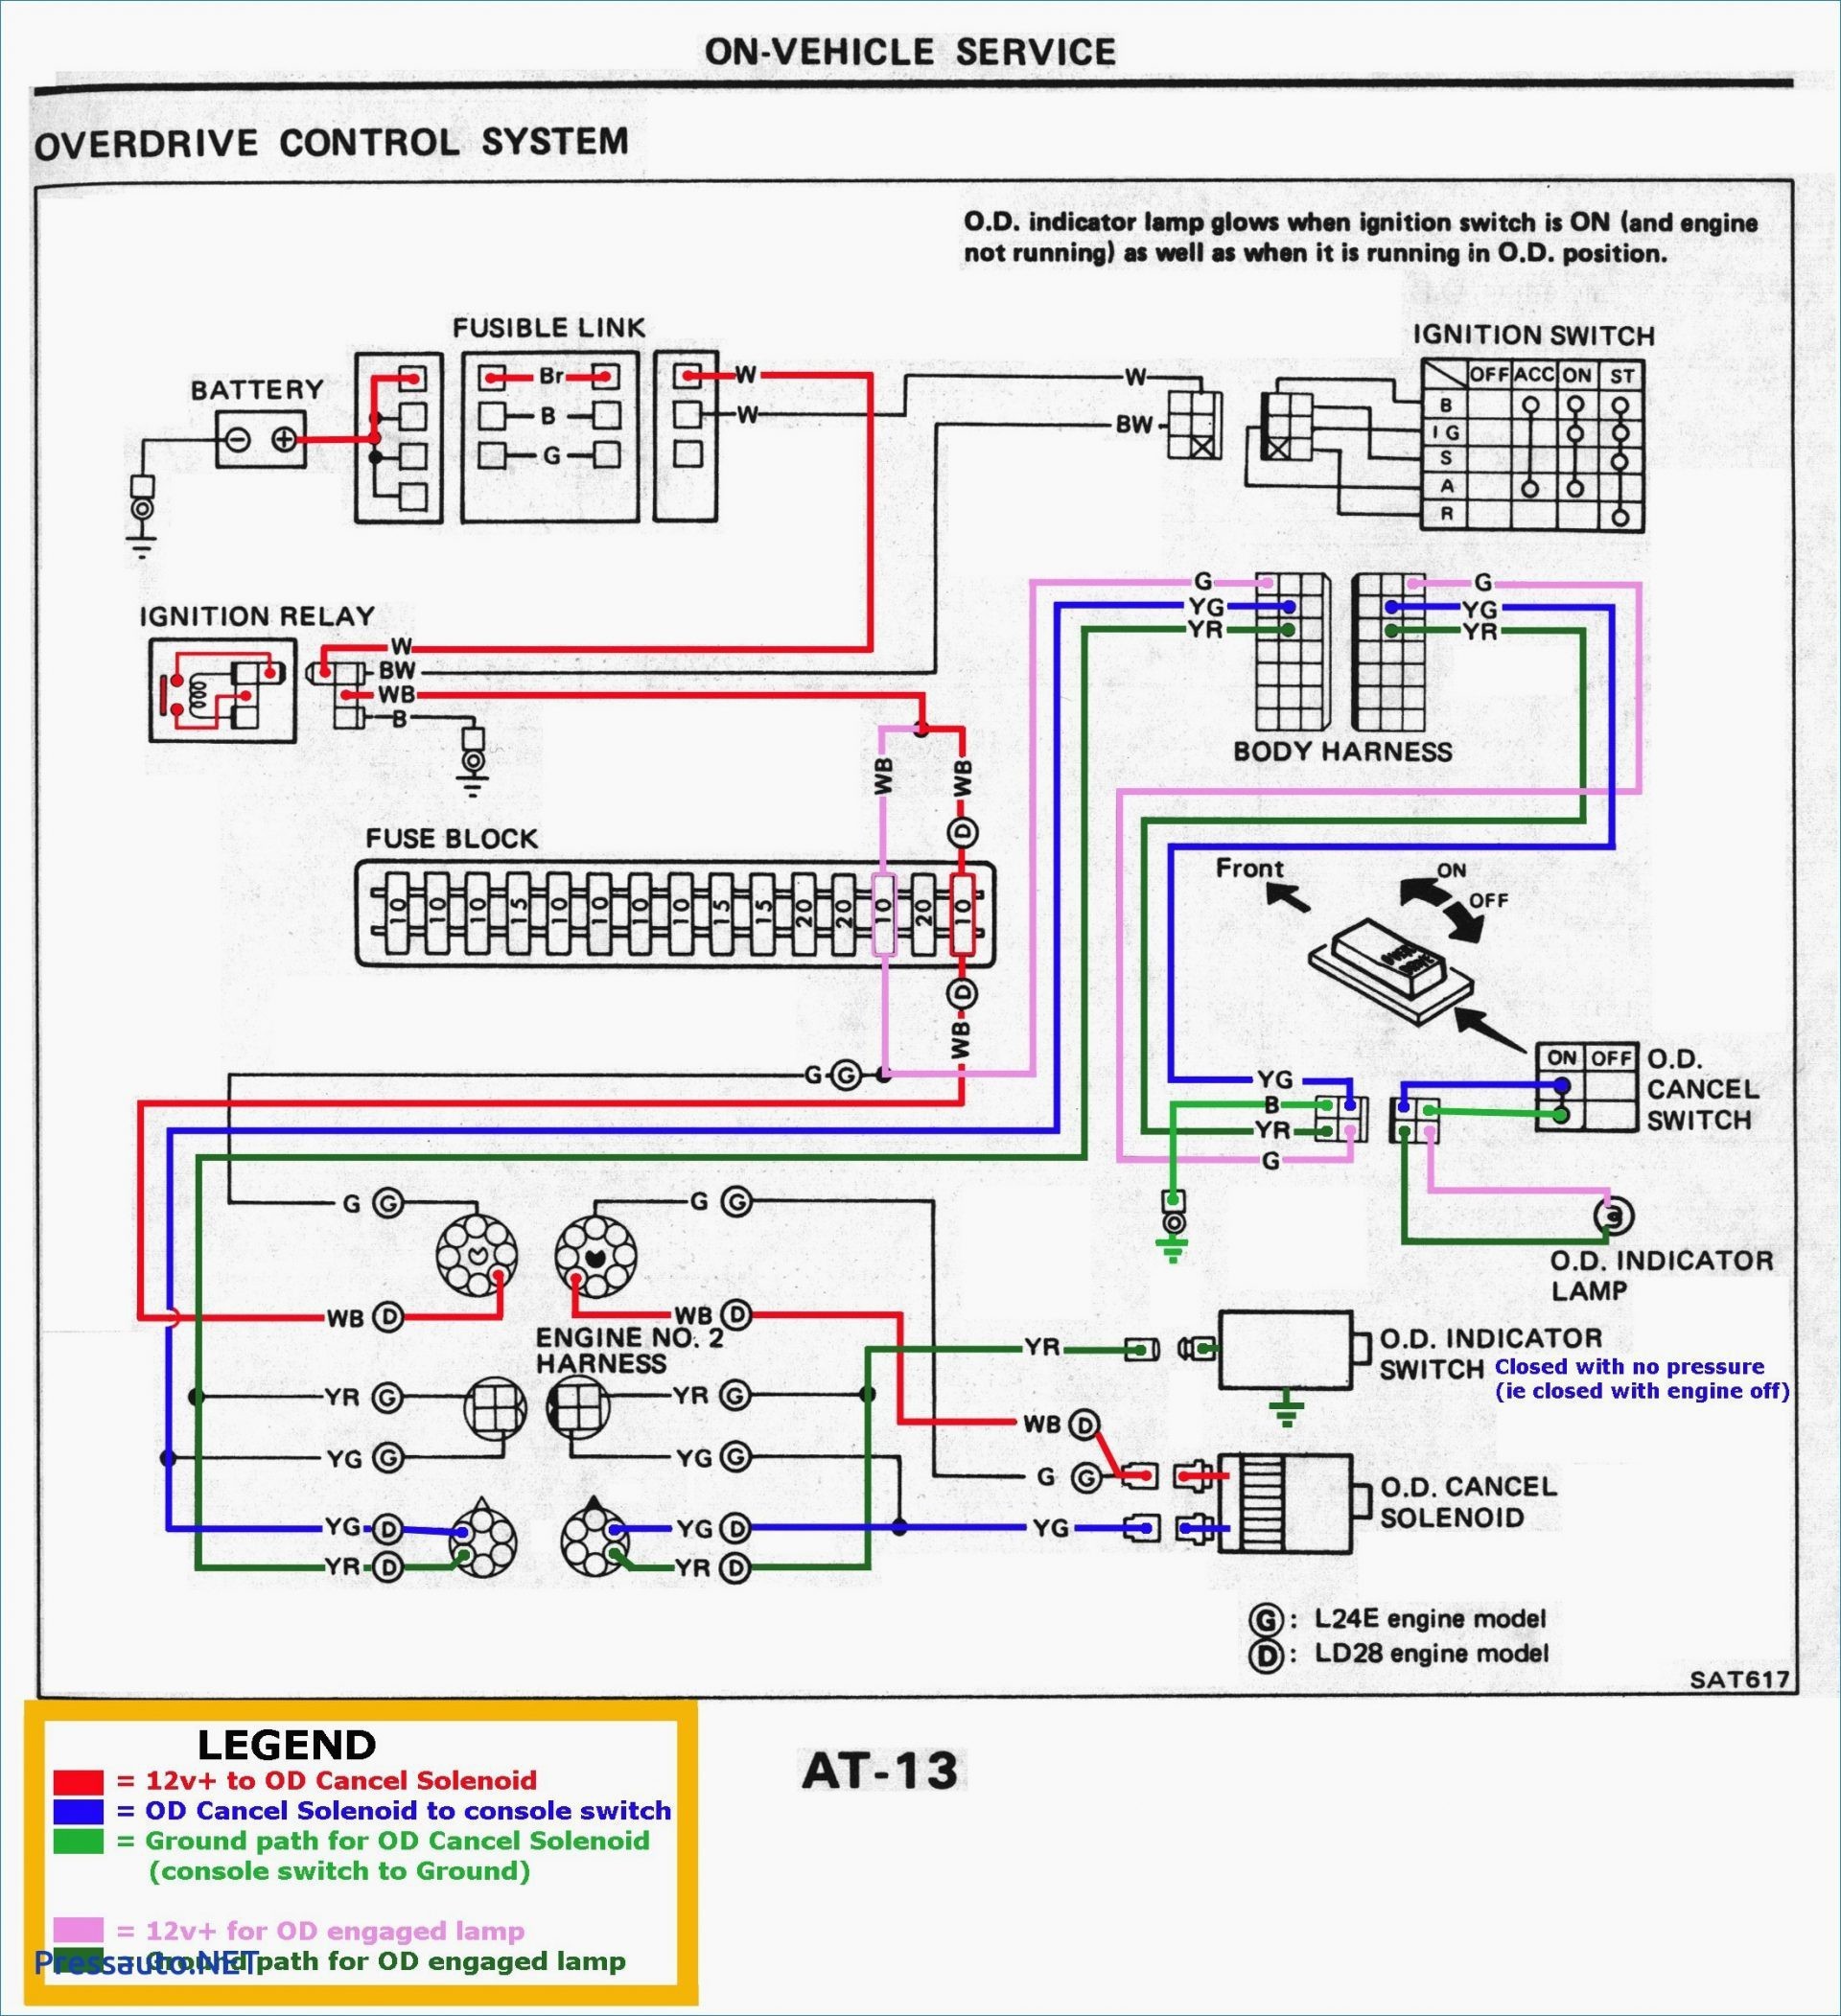 Wiring Diagram for Boat Trailer Plug top rated Harbor Freight Boat Trailer Harbor Freight Trailer Wiring Diagram